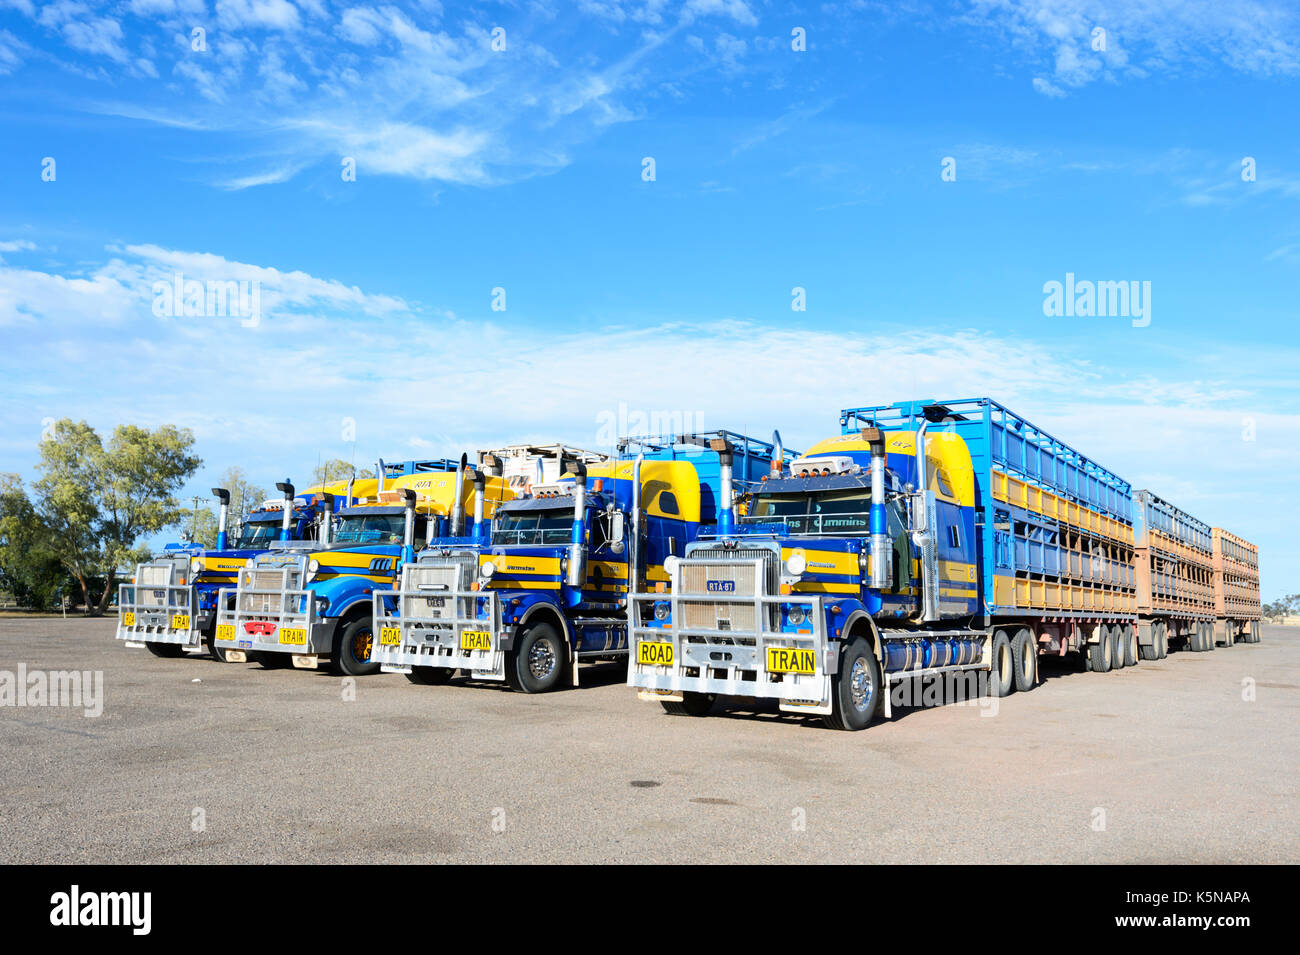 Cattle trucks or Road Trains with three trailers parked at a rest area, Queensland, QLD, Australia Stock Photo